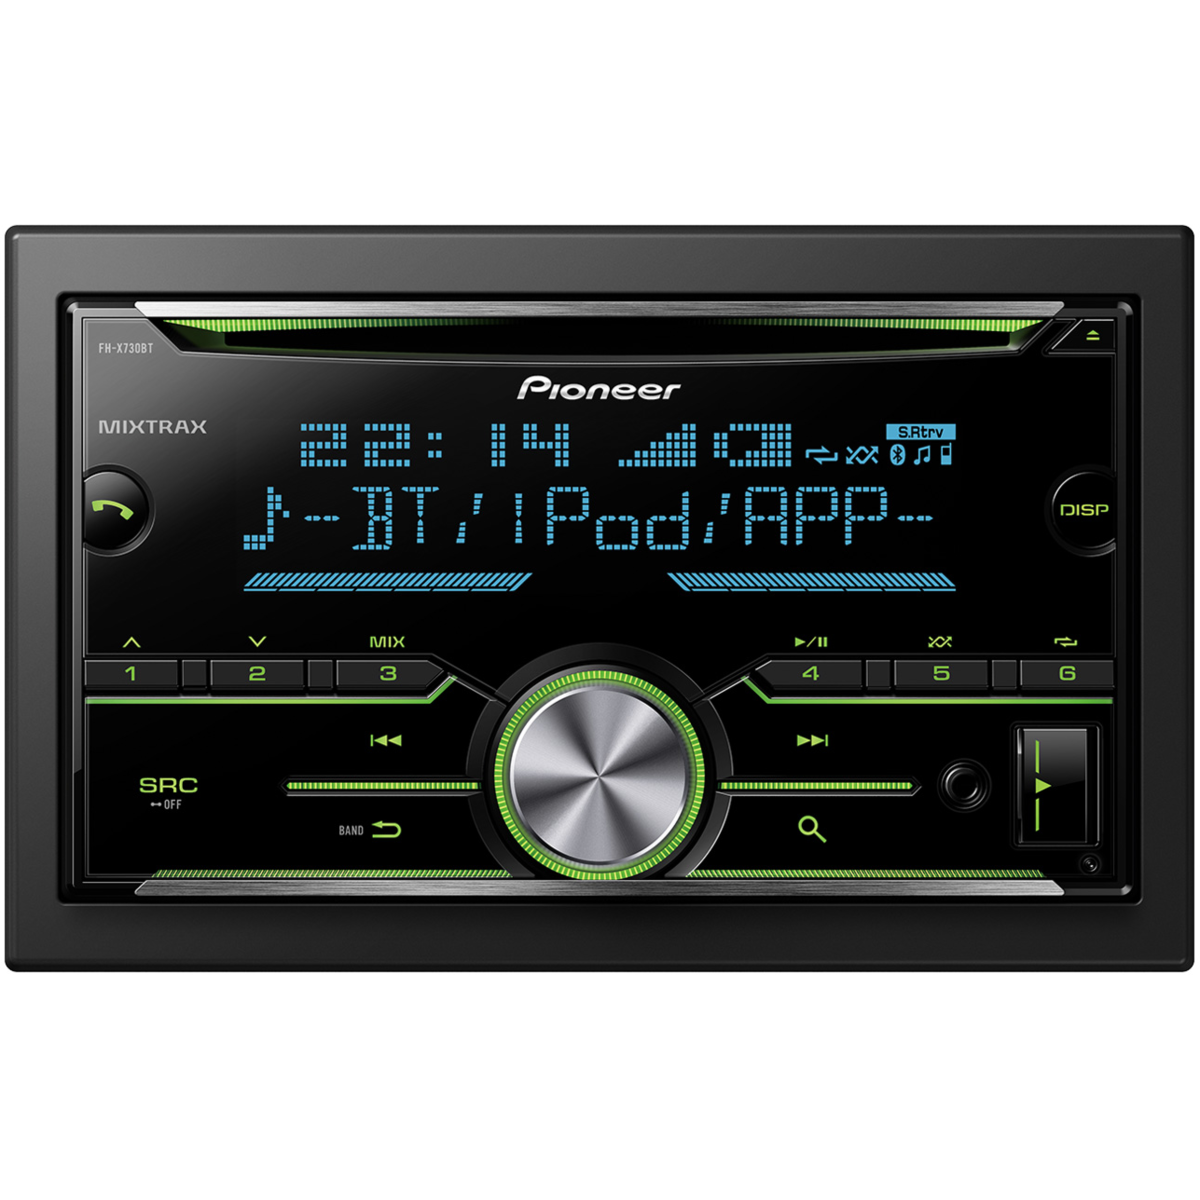 Player auto FH-X730BT Pioneer, 4x50W, USB, AUX, RCA, Control iPhone, Android, Bluethooth